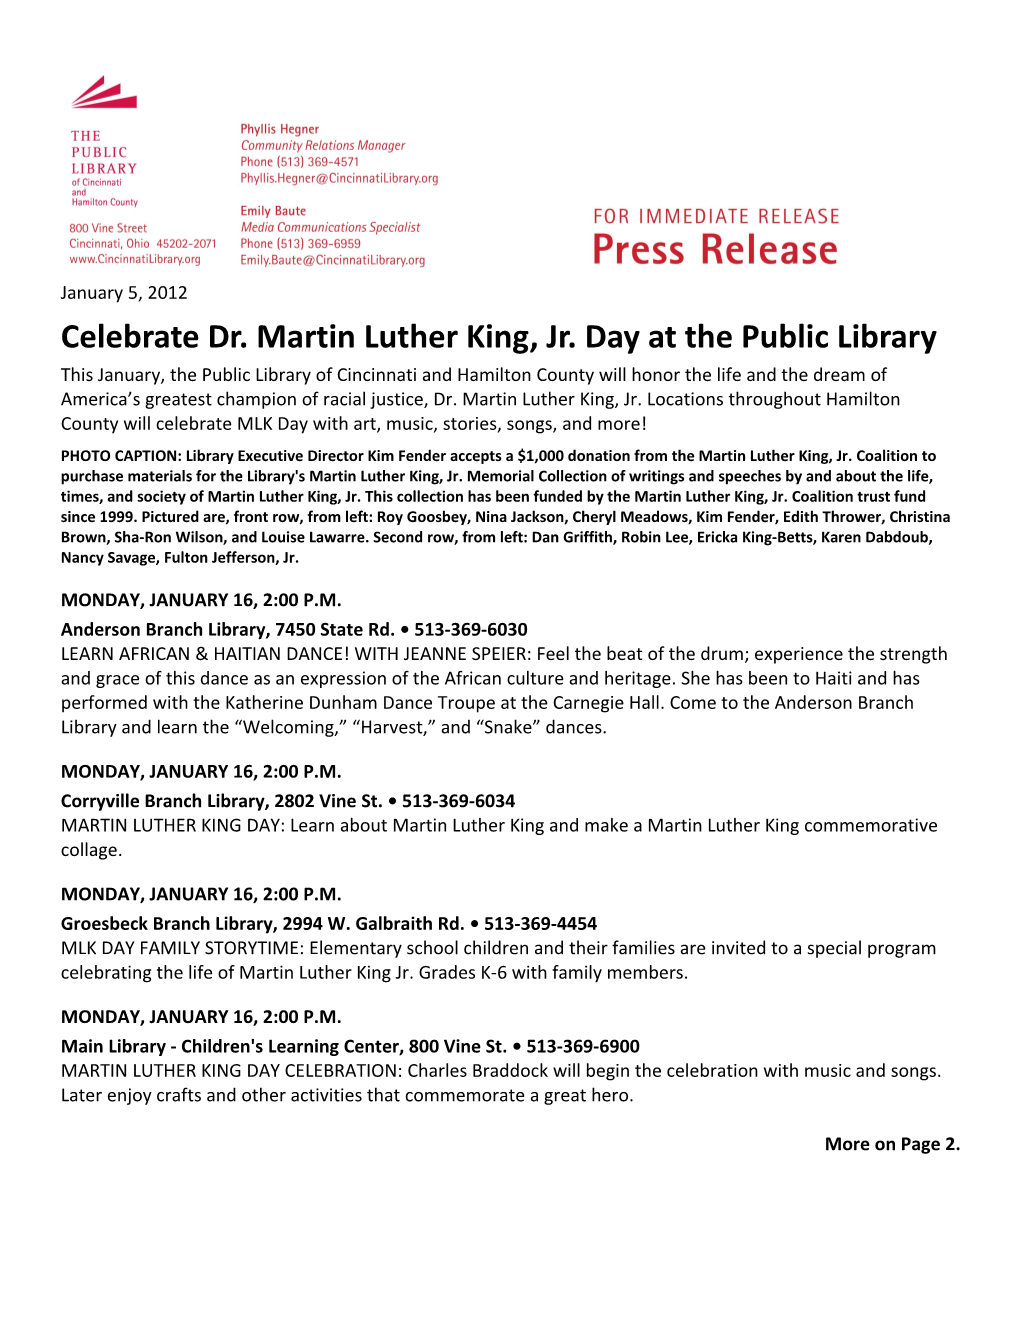 Celebrate Dr. Martin Luther King, Jr. Day at the Public Library